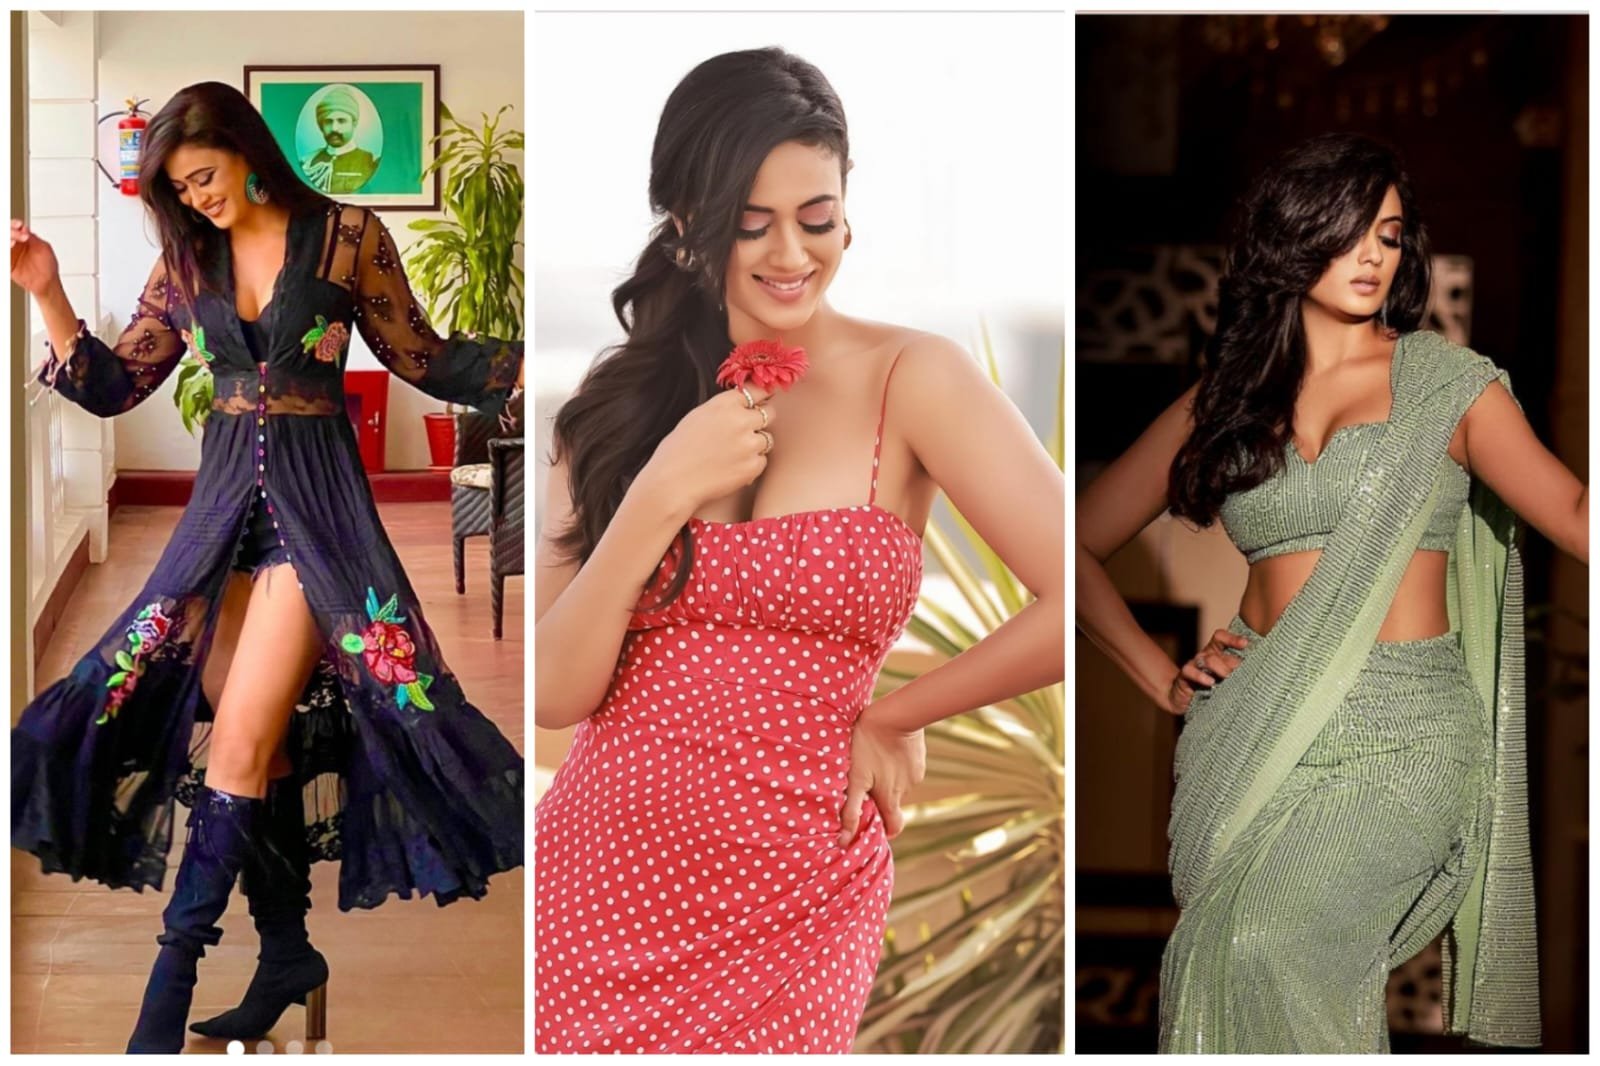 40 year old Shweta Tiwari competes with youngsters in every look, be it traditional or western.